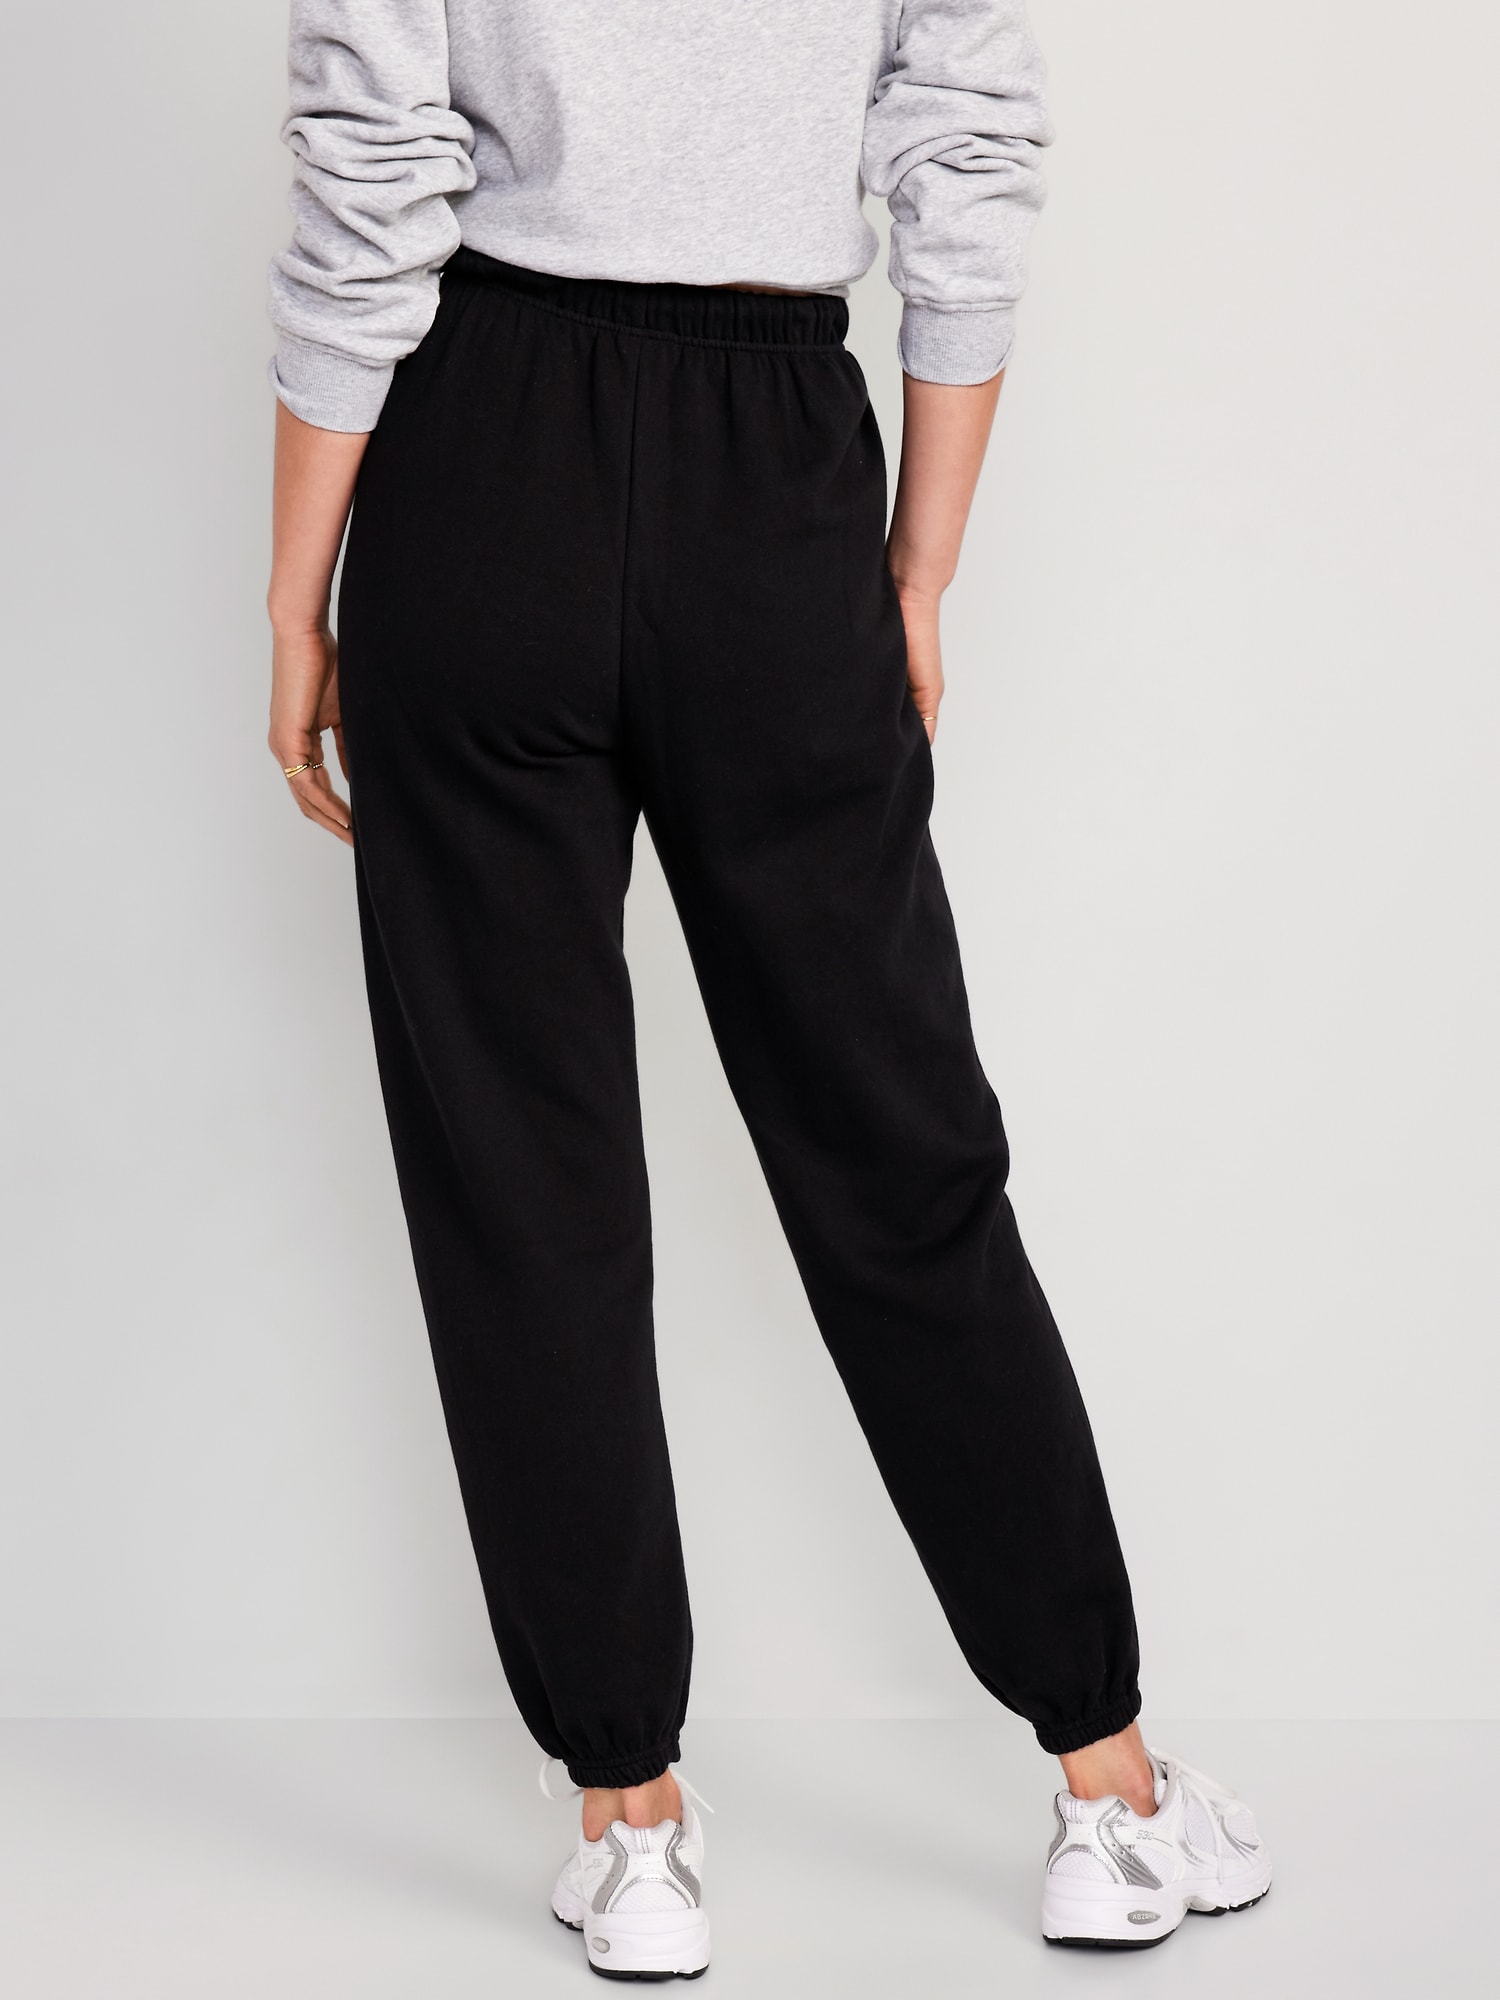 Old Navy Joggers Dress Pants for Women